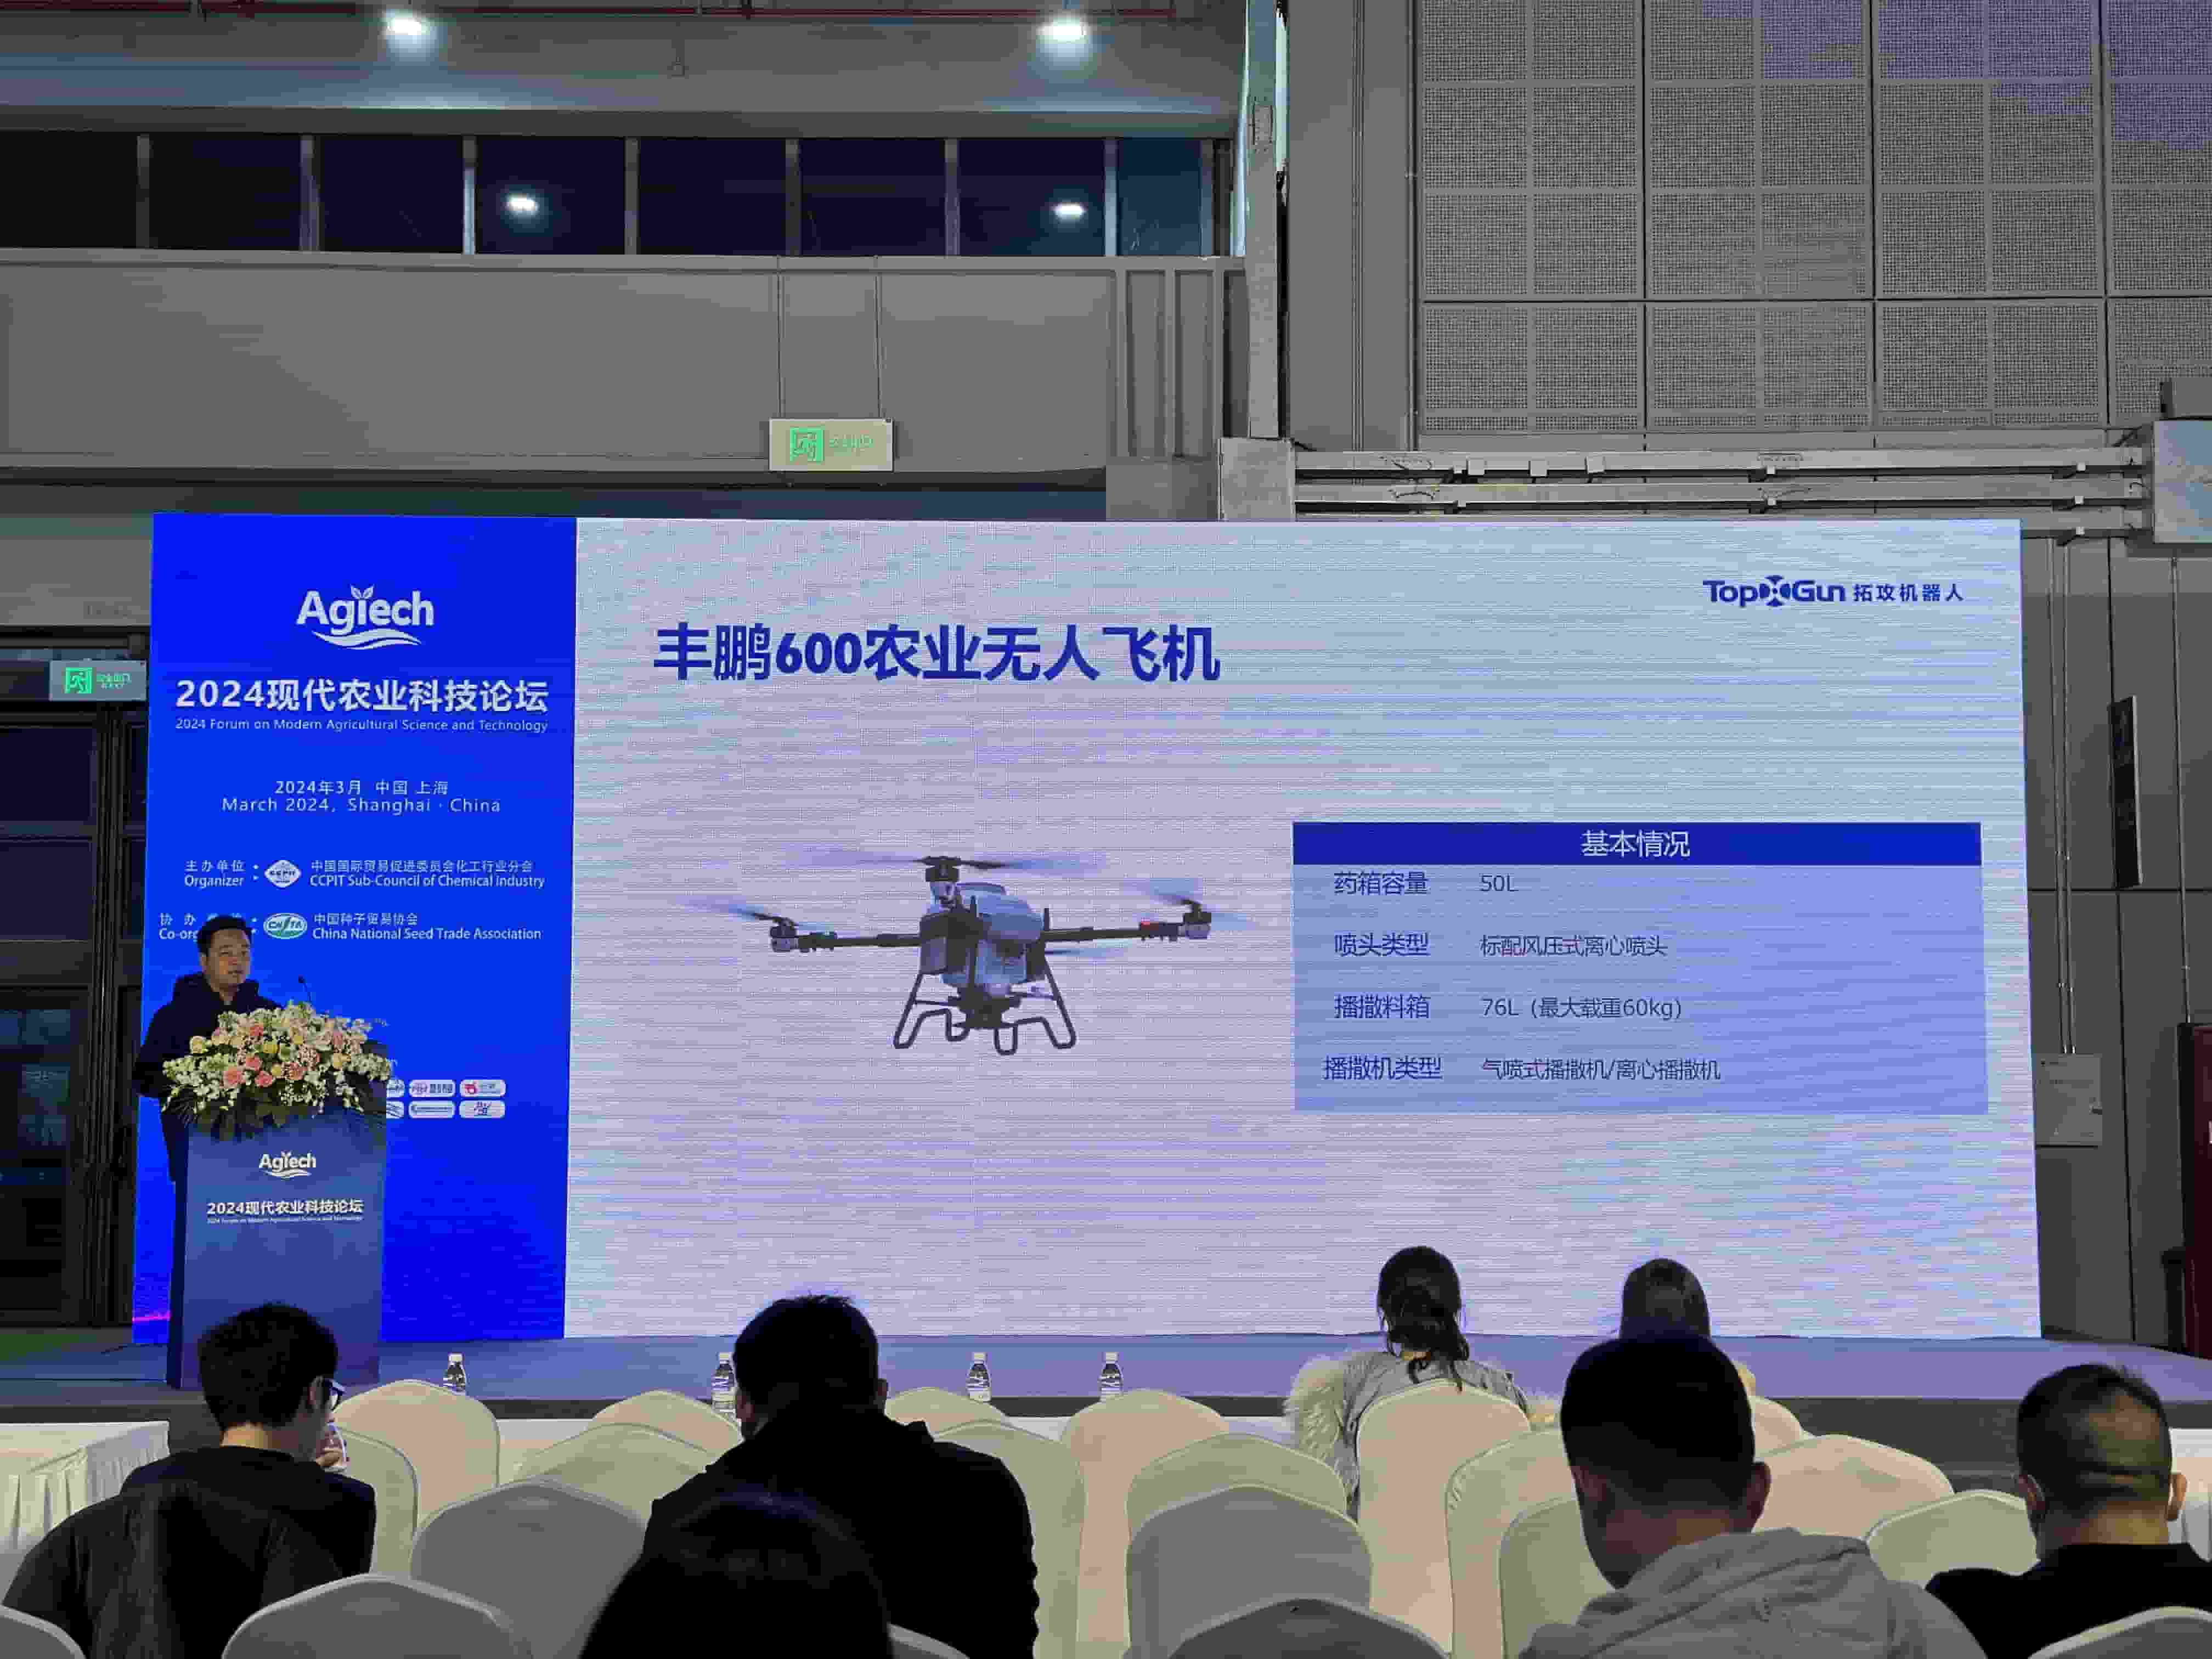 Topxgun representative shared about energy-saving, efficient, and high-yield, sharing how Topxgun drones are helping to modernize agricultural cultivation and crop protection